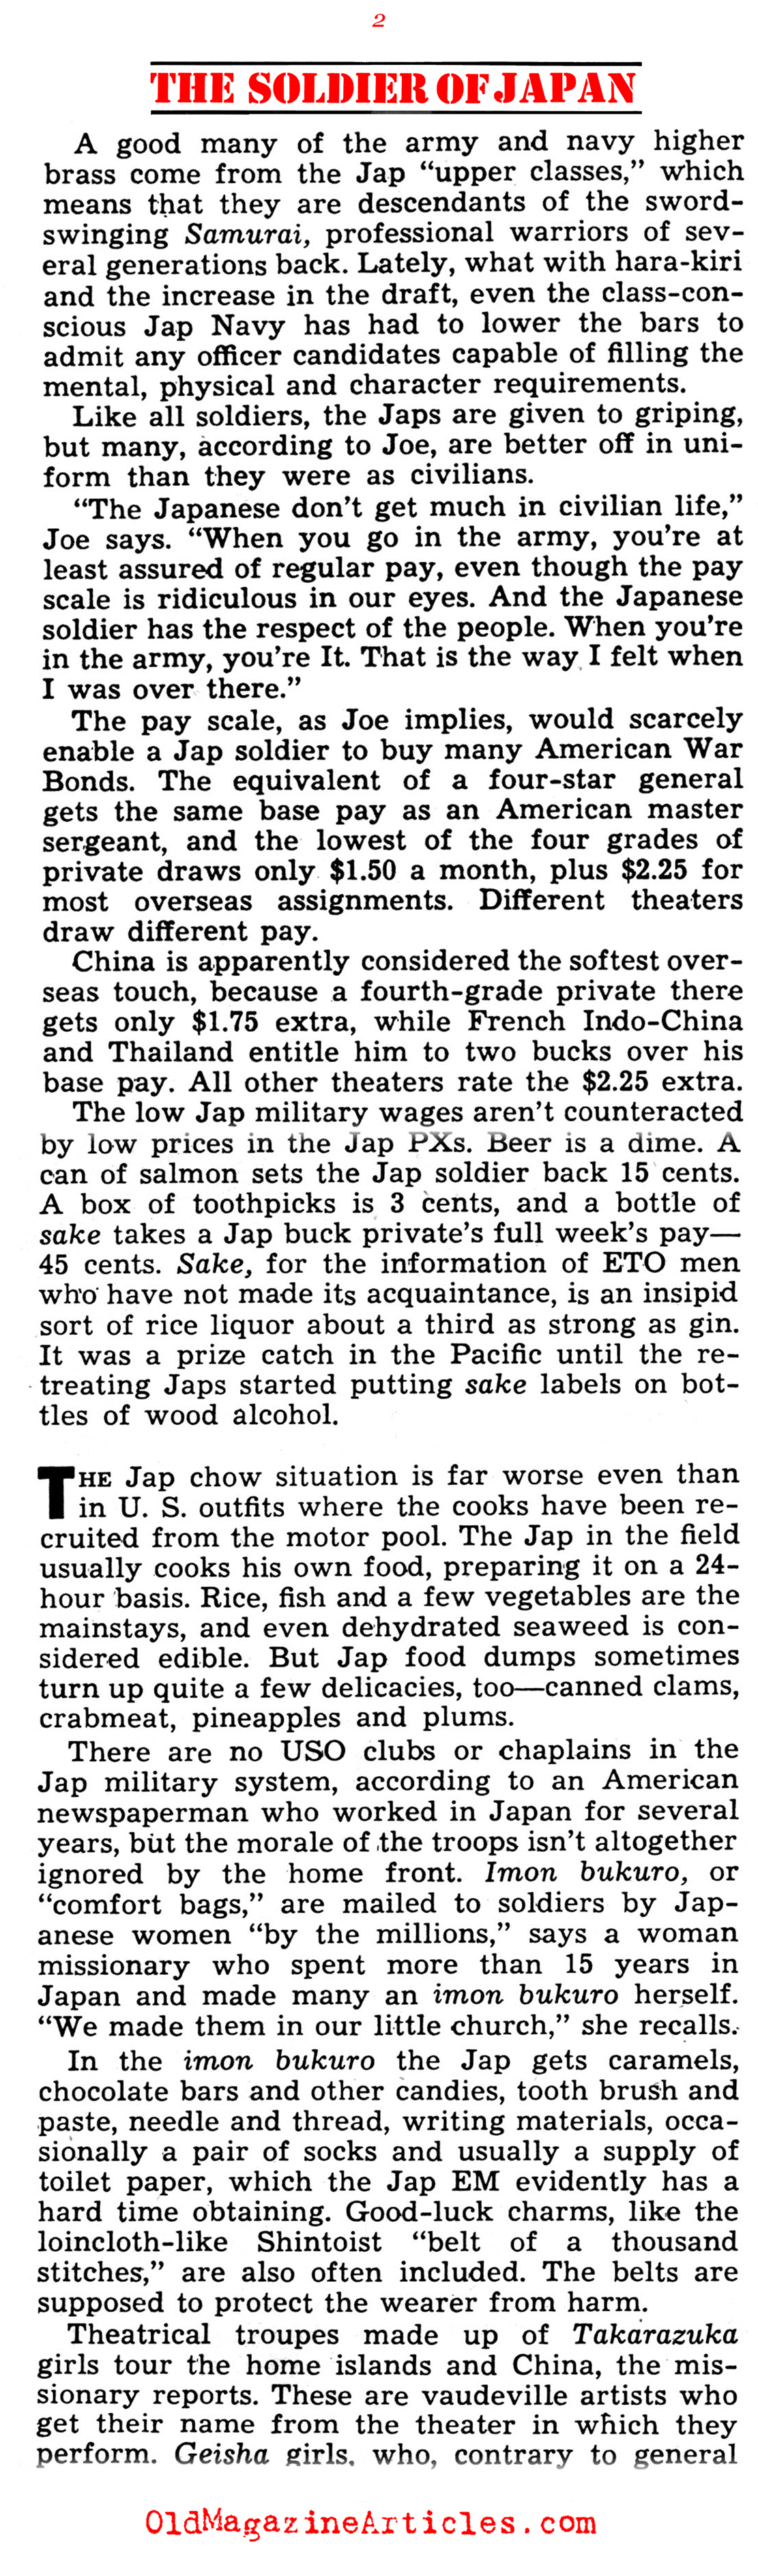 A Study of the Japanese Soldier (Yank Magazine, 1945)